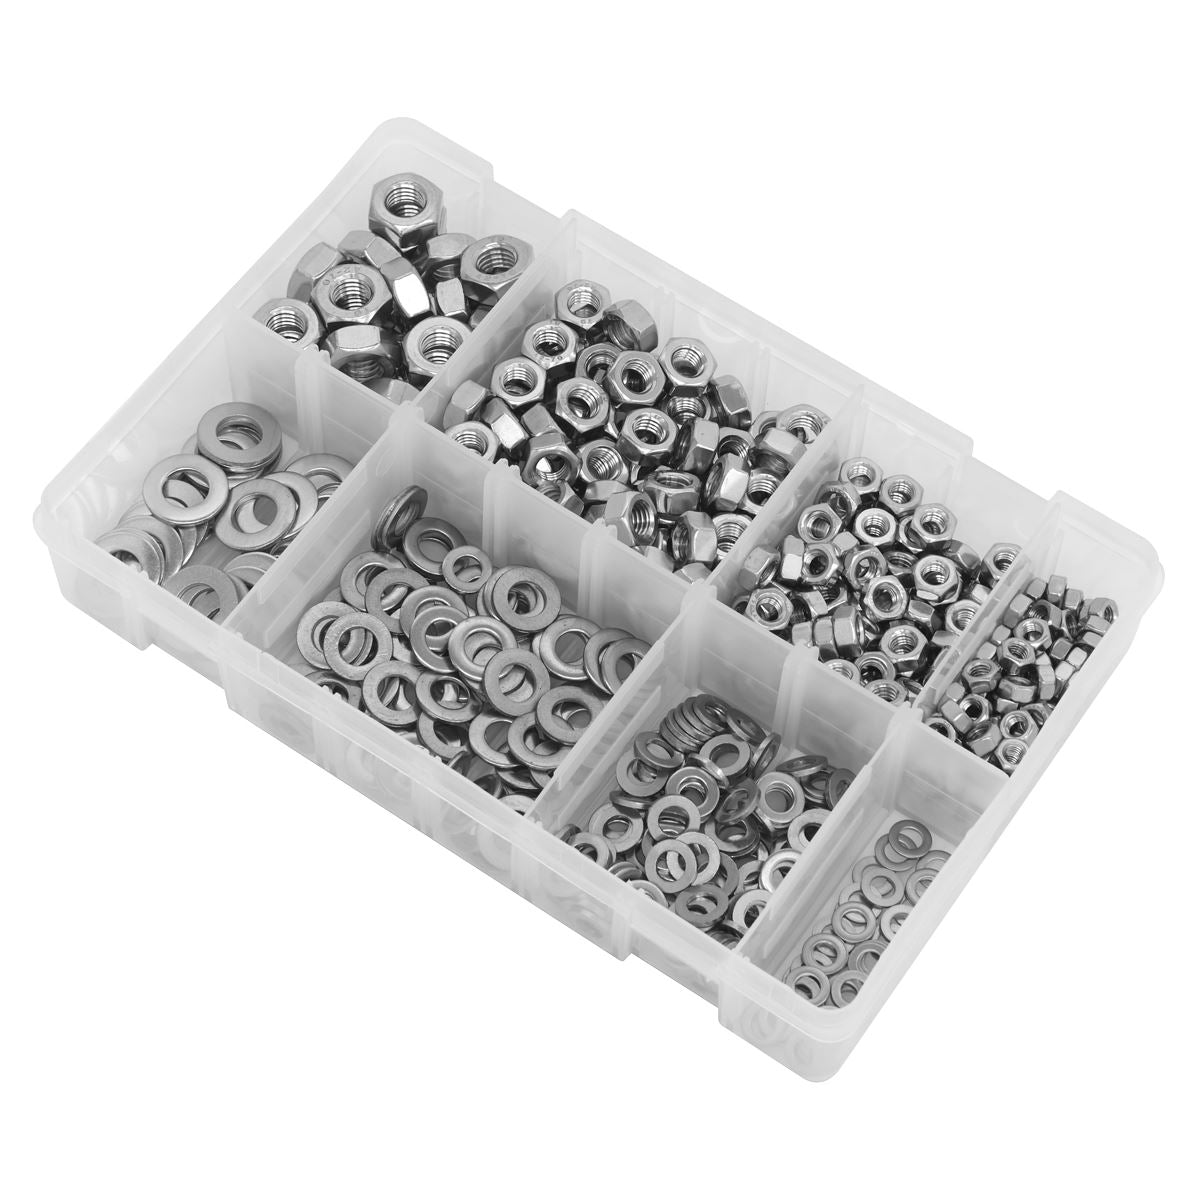 Sealey Stainless Steel Nut and Washer Assortment 500pc M5-M10